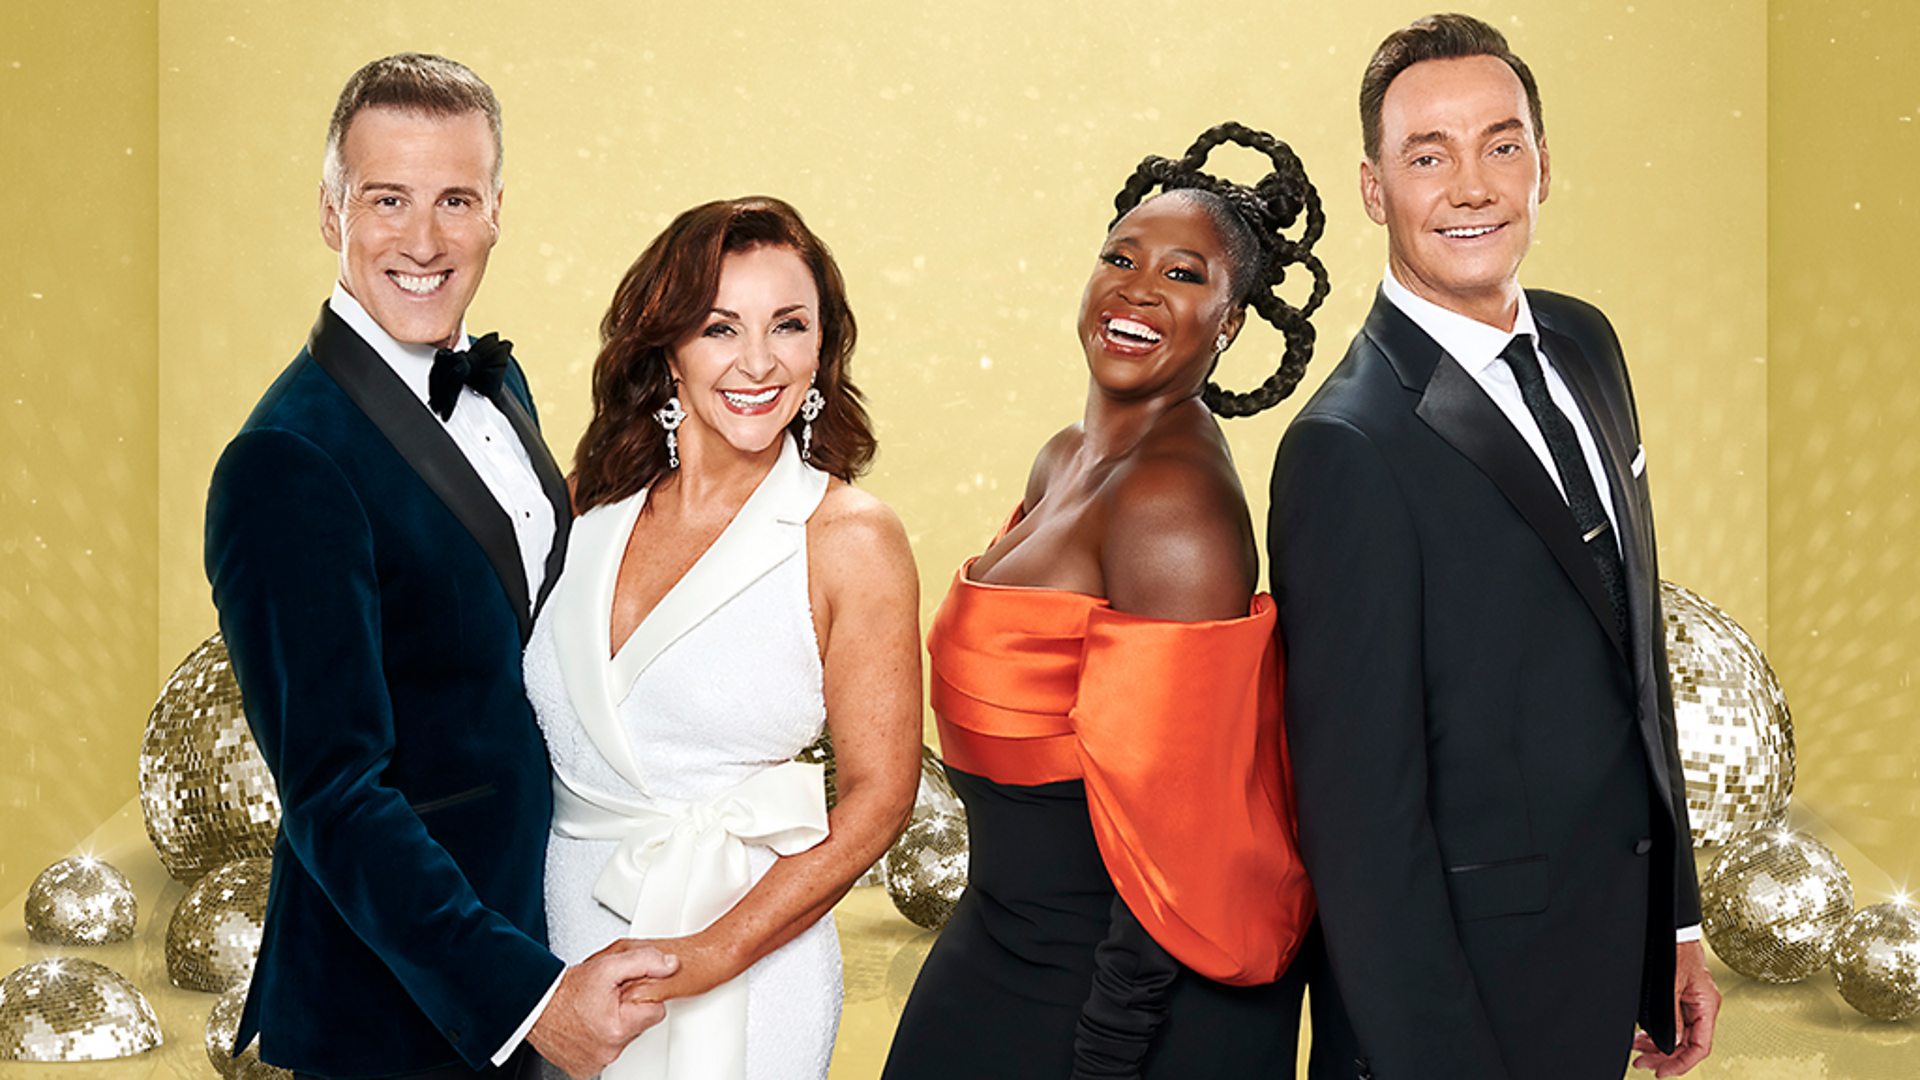 Strictly Come Dancing judges Anton, Shirley, Motsi and Craig on their